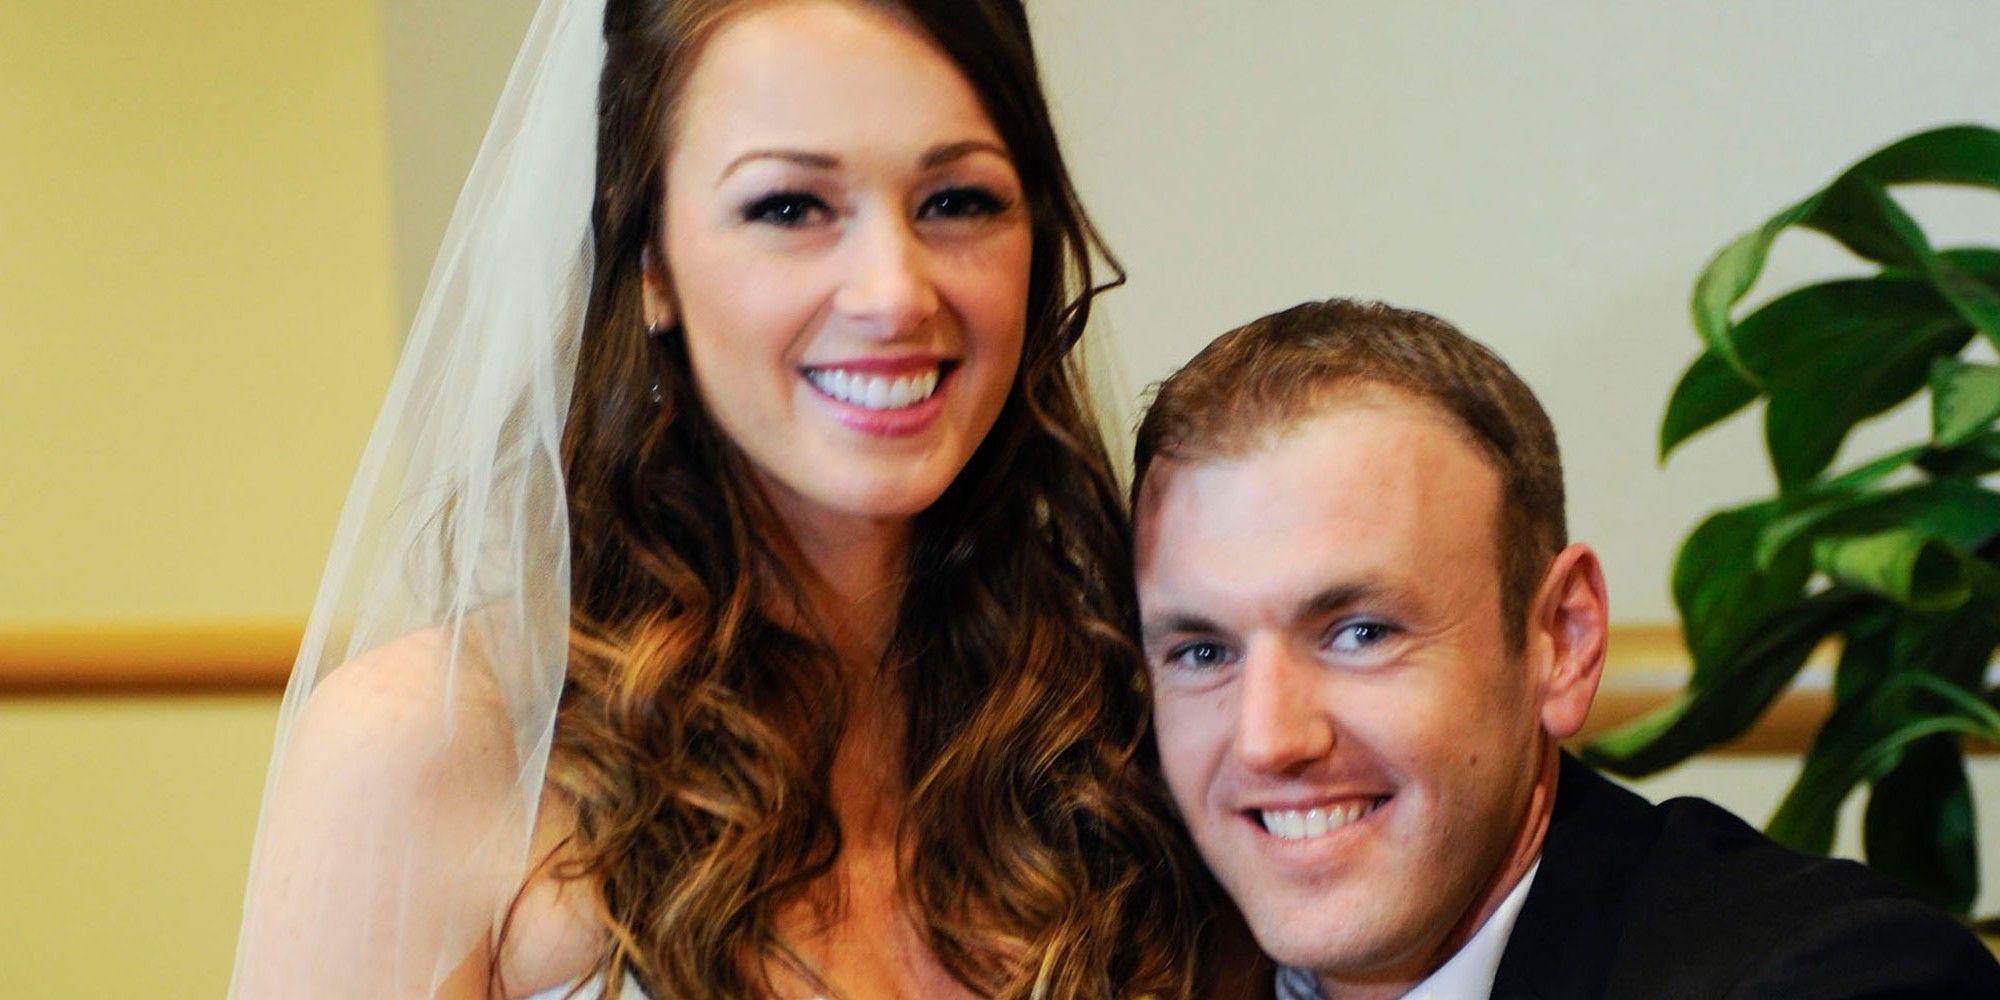 Jamie Otis Doug Hehner Married At First Sight in wedding outfits